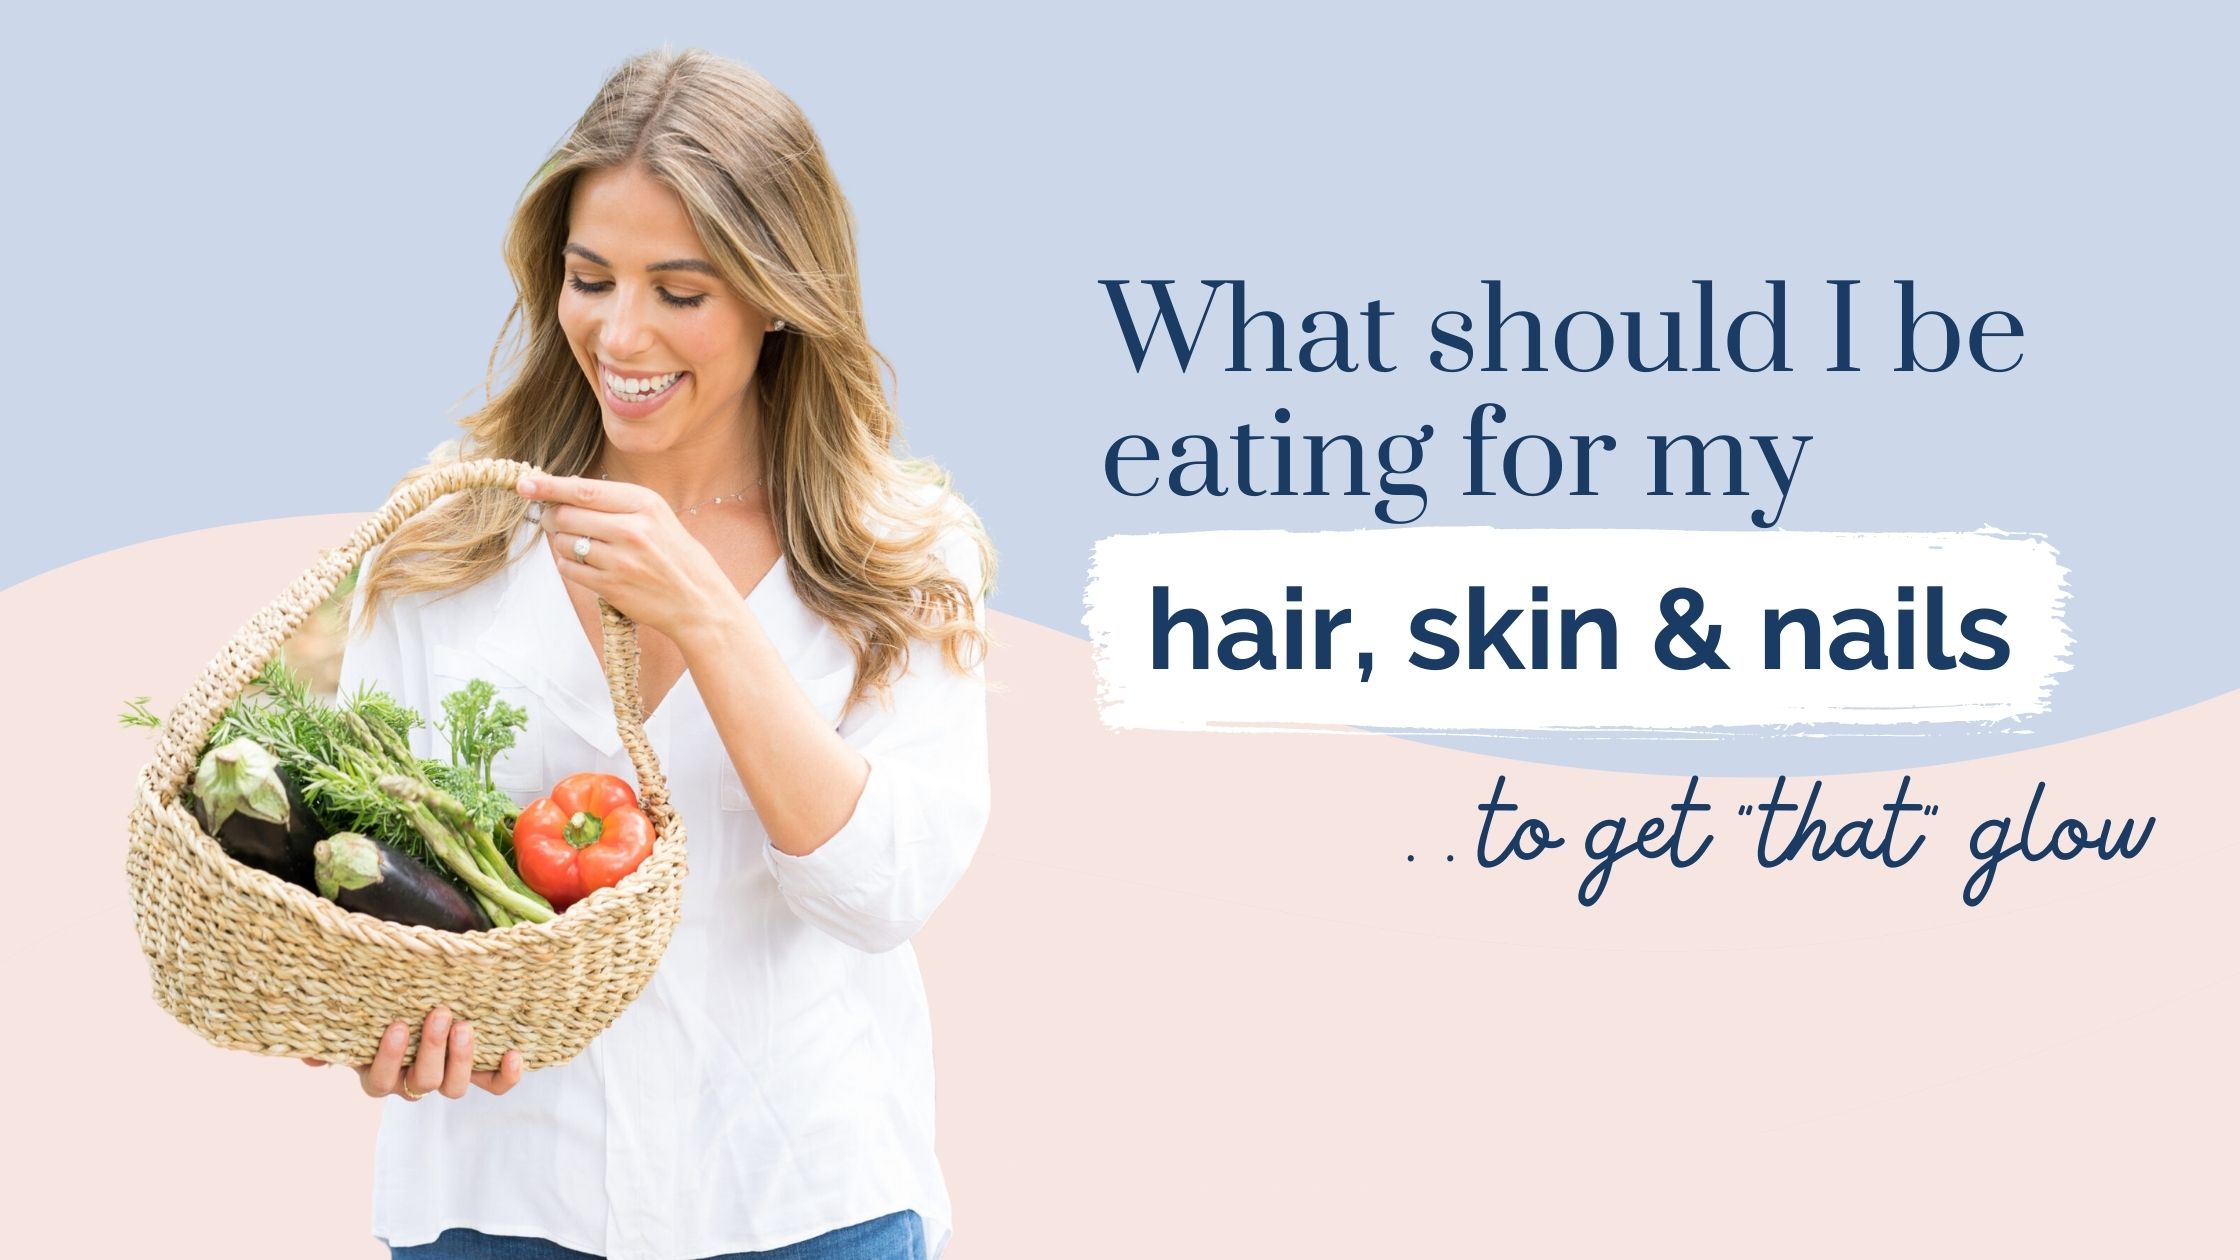 The best foods for your skin, hair and nails